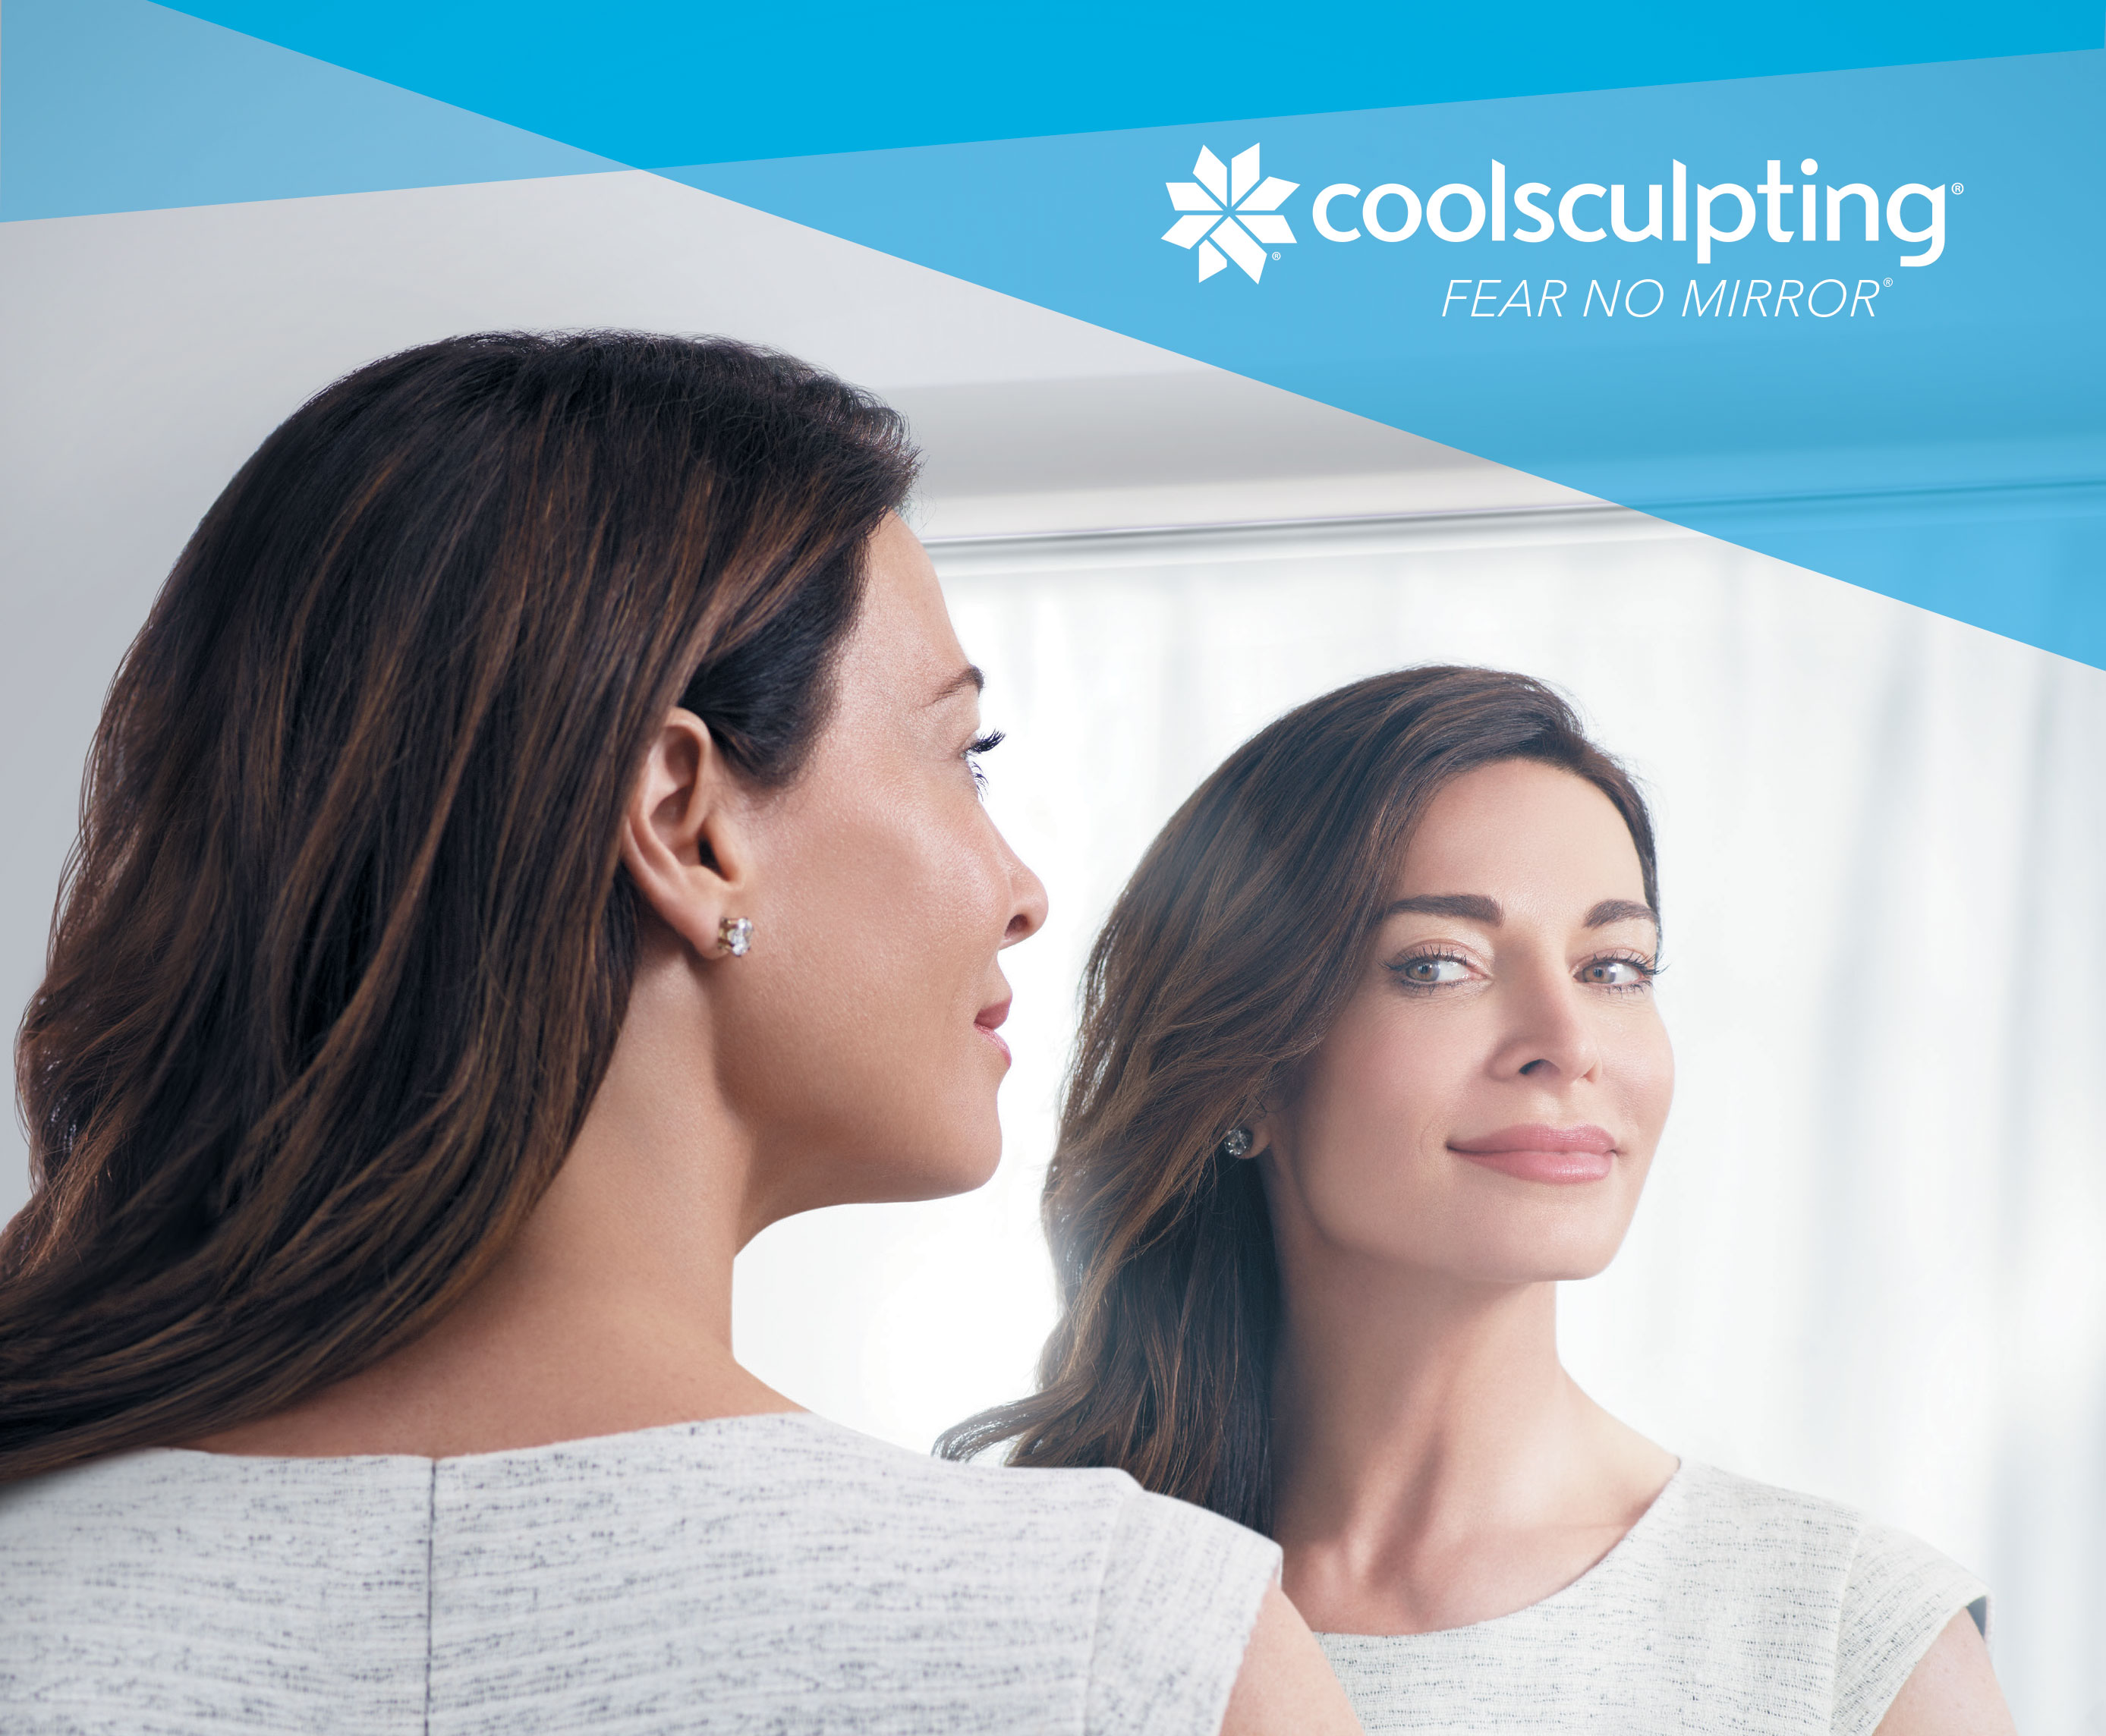 CoolMini - Dermguy Guide to Coolsculpting